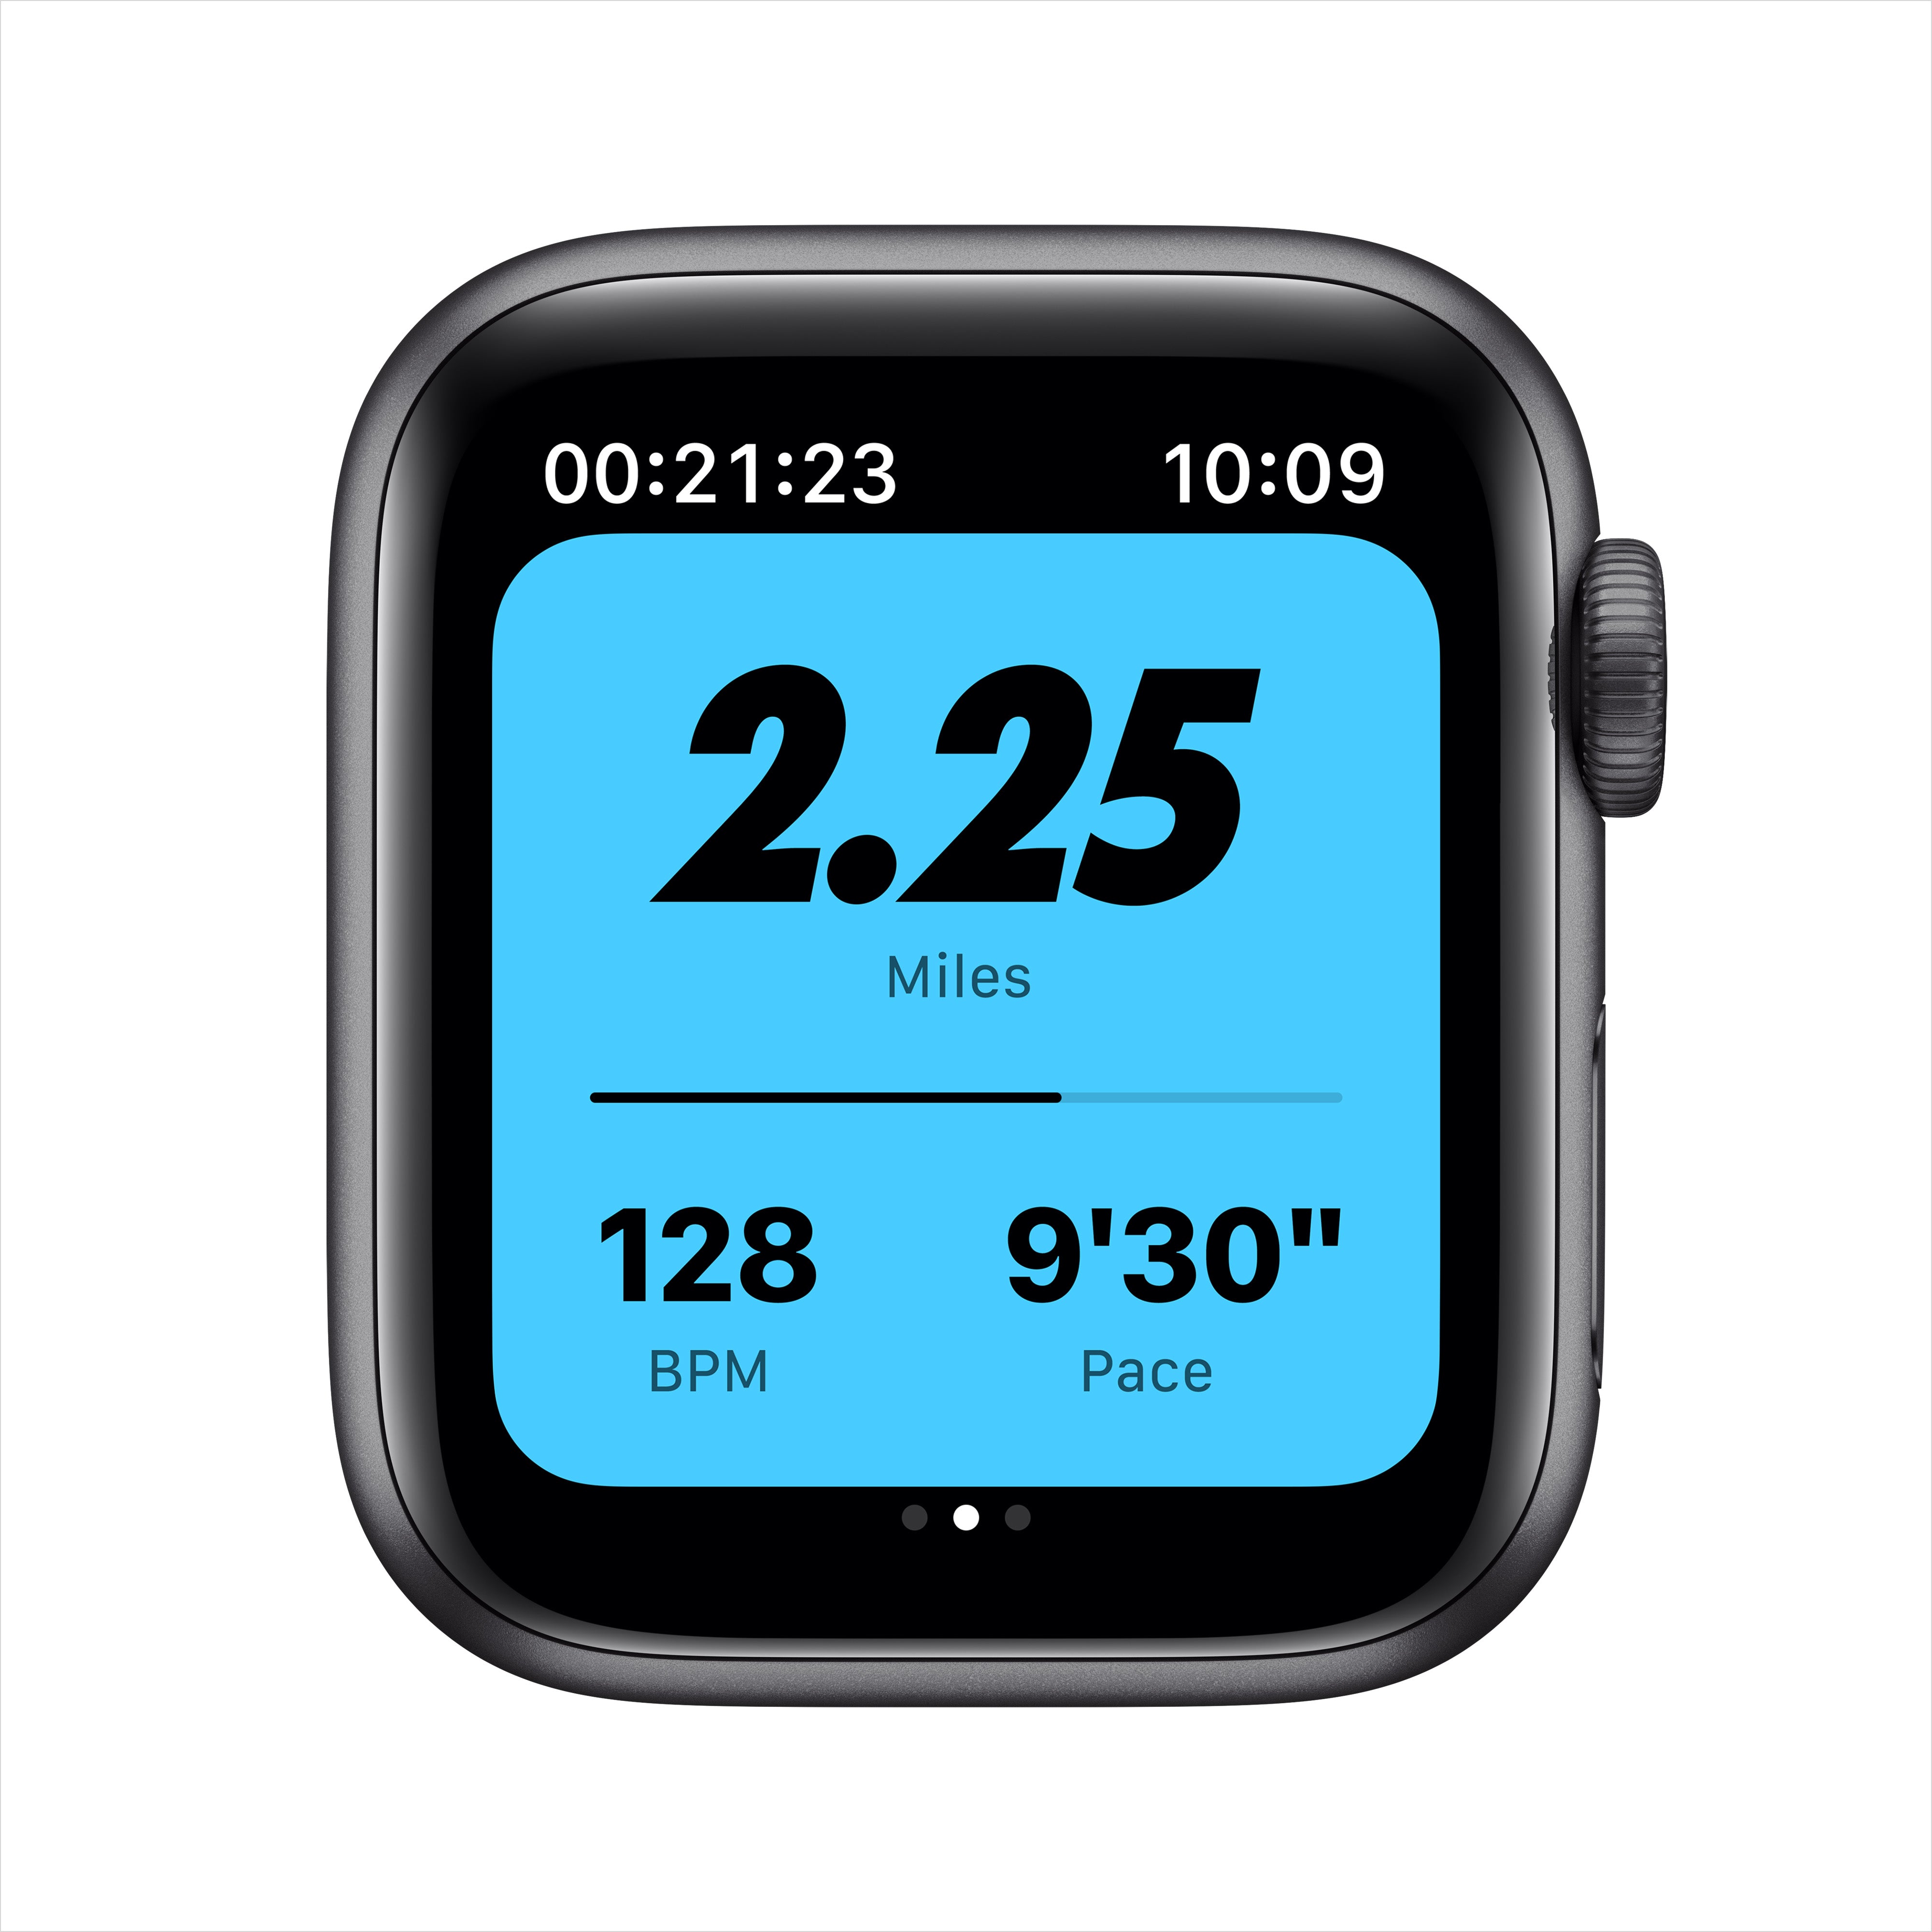 Apple Watch Nike Series 6 GPS - Silver Aluminum Case with Pure Platinum/Black Nike Sport Band